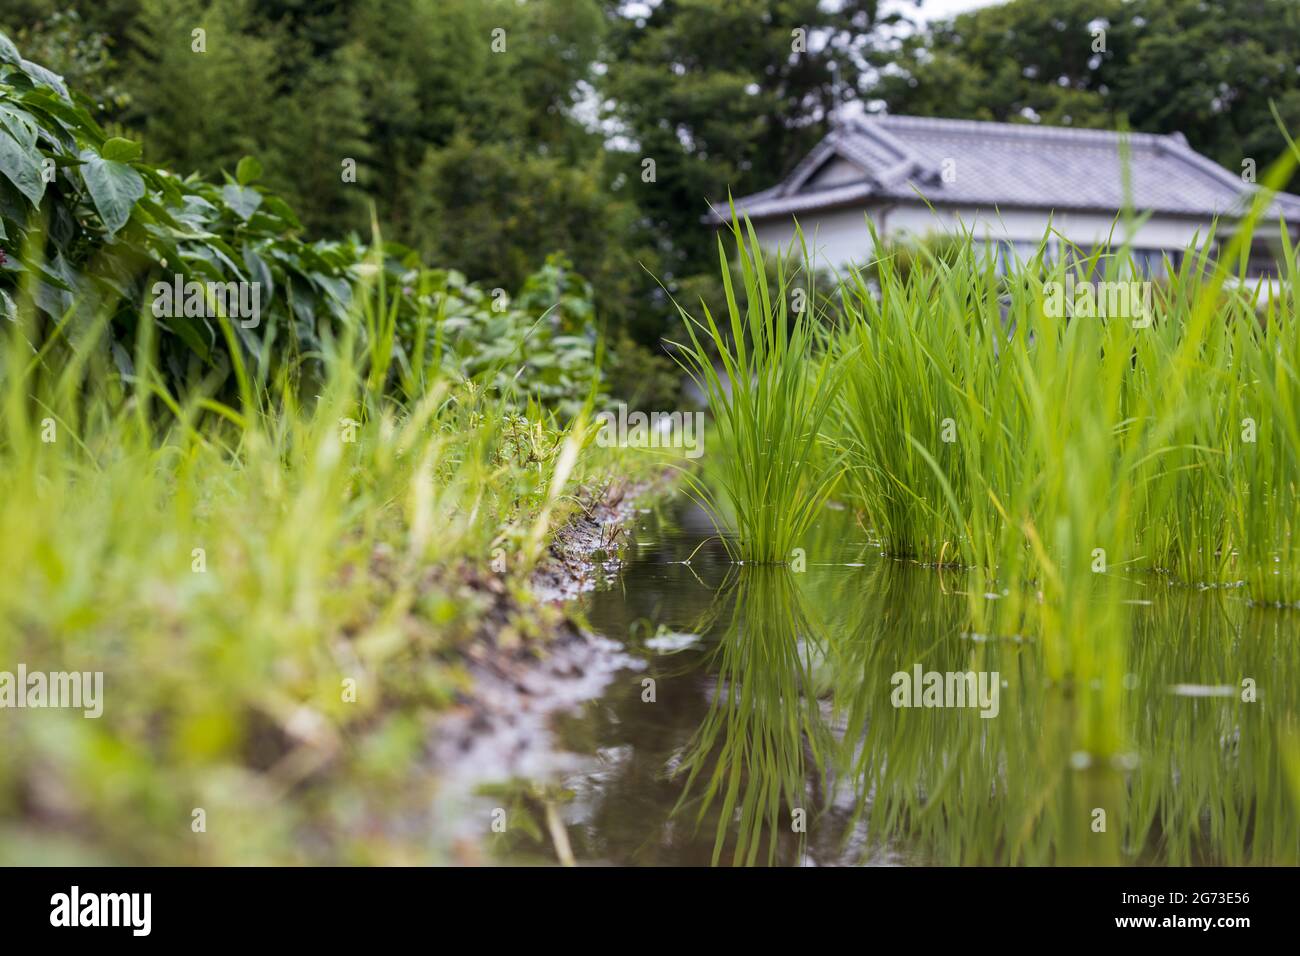 Ground-level view of fresh rice in flooded field Stock Photo